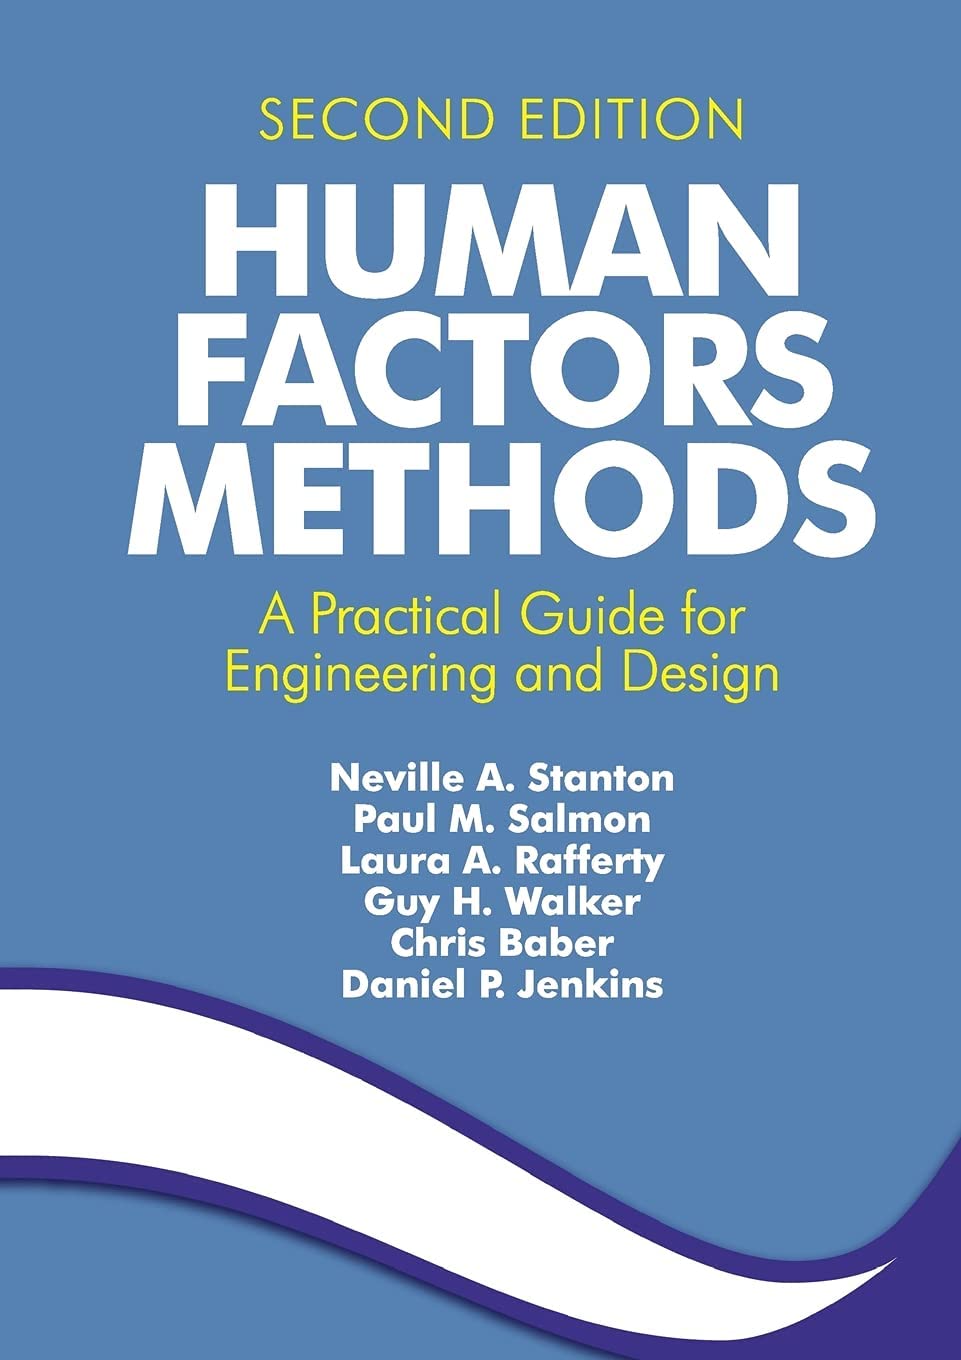 Human Factors Methods: A Practical Guide for Engineering and Design